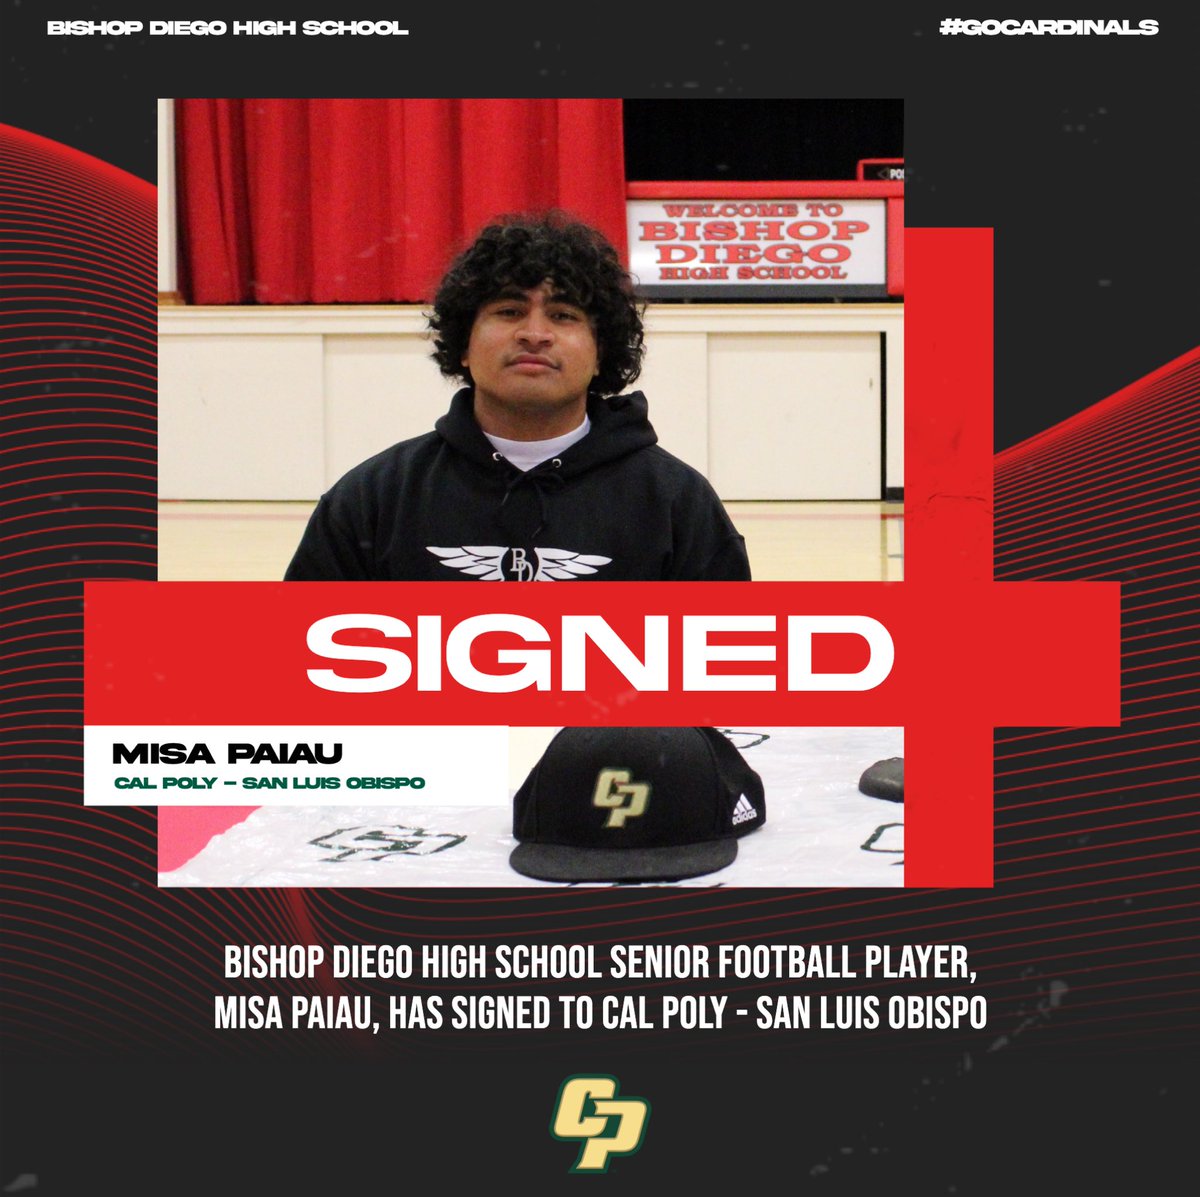 Signing Day 2024 | Congratulations to Misa Paiau for signing his National Letter of Intent to play Division 1 football 🏈 at Cal Poly - SLO. We are proud of this young man and his perseverance and dedication to the Bishop Diego community! #GoCardinals #RideHigh